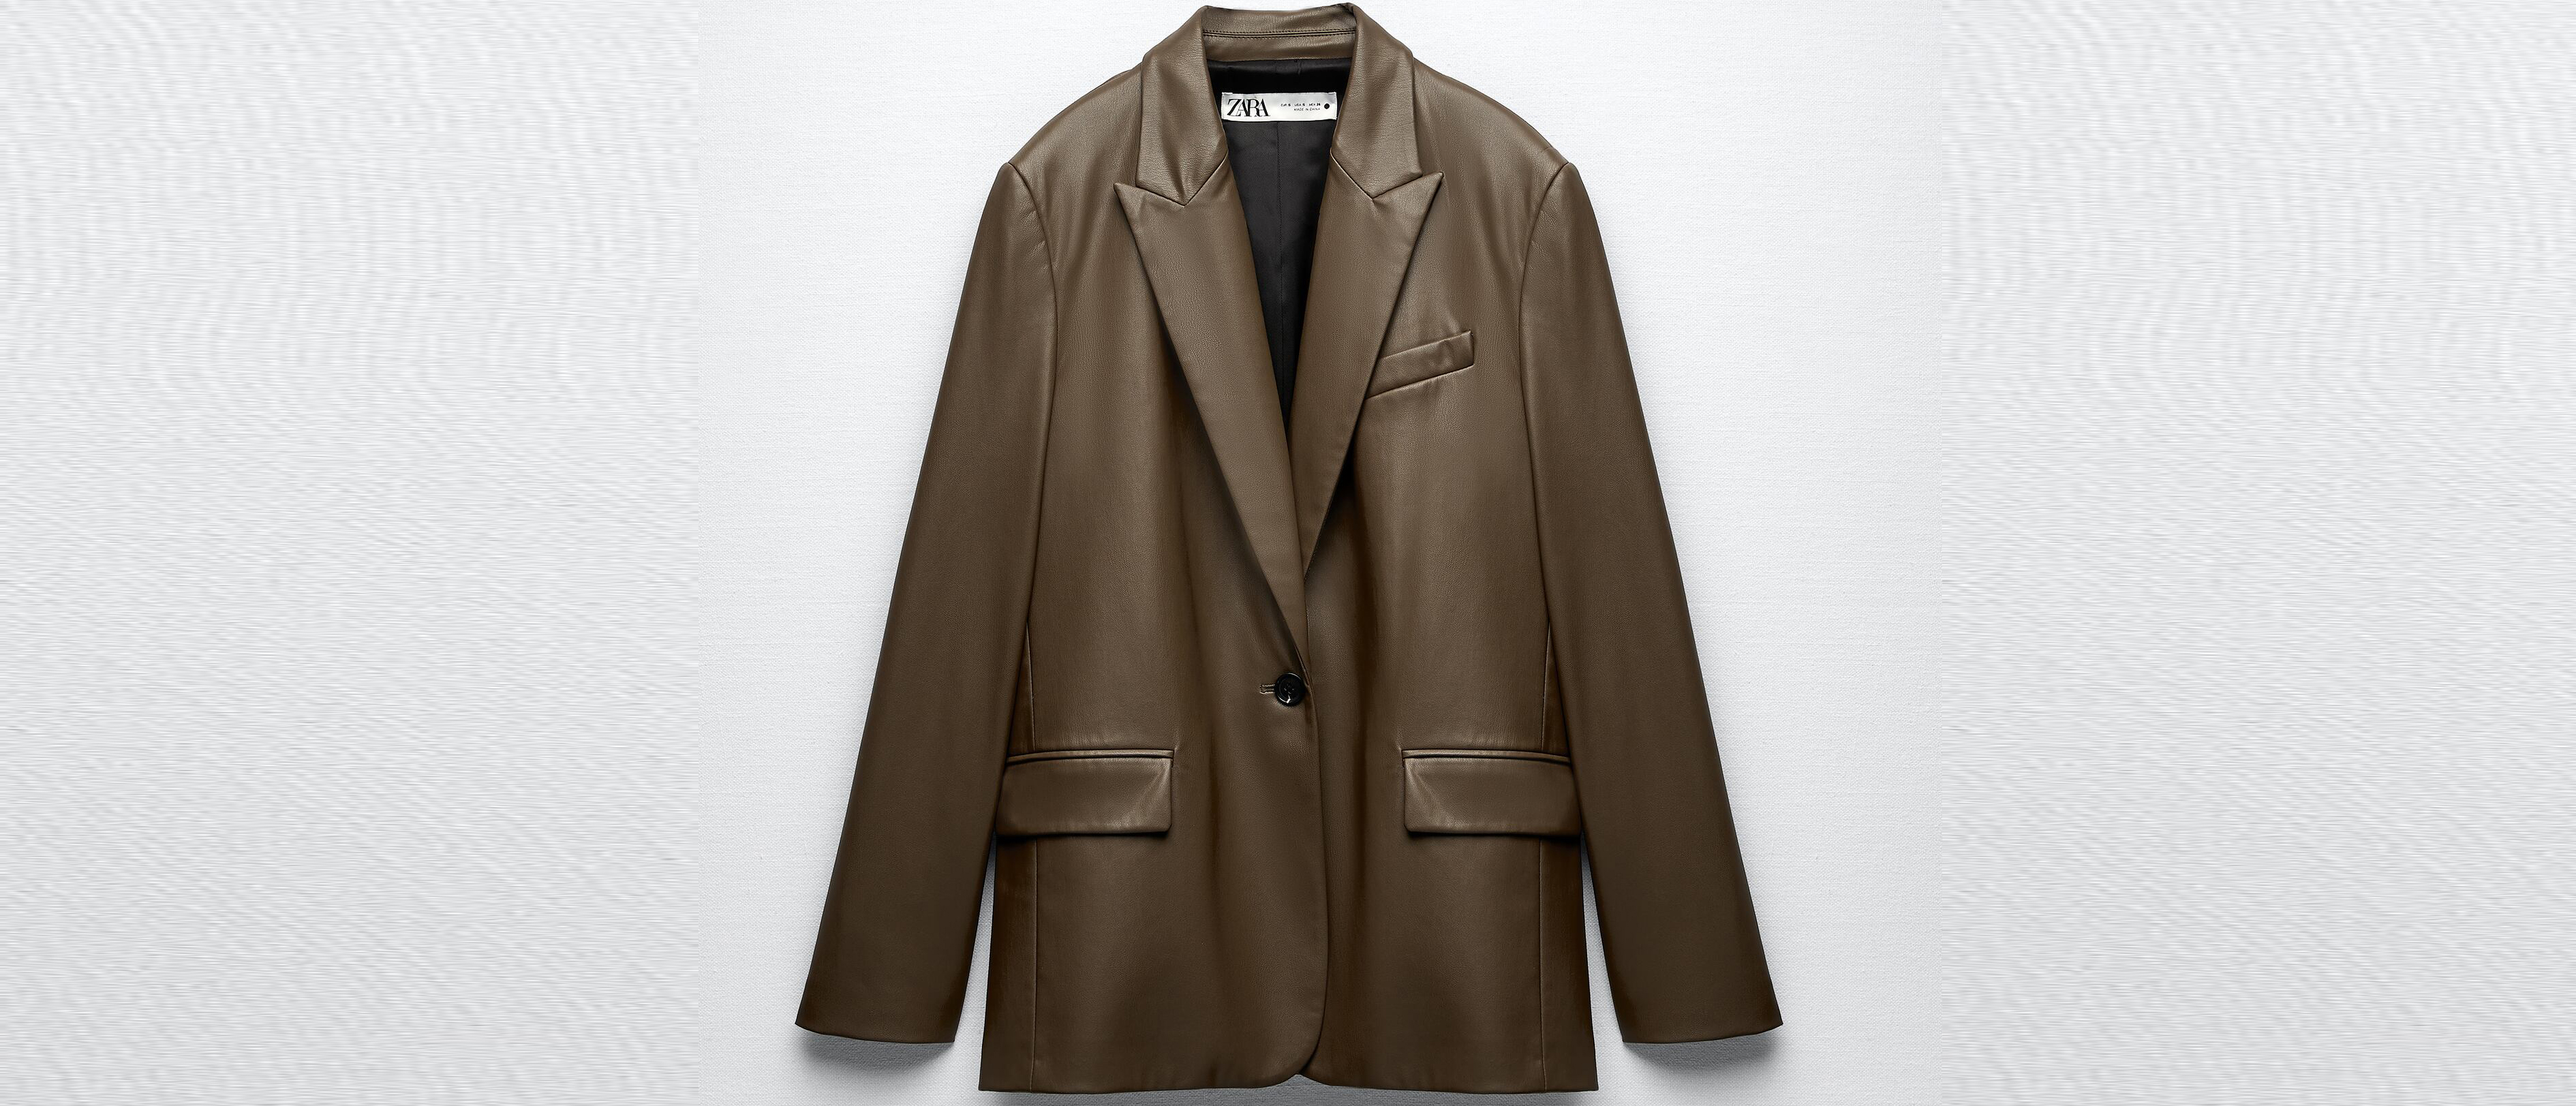 Zara Faux Leather Blazer With Pockets in Brown, £29.99 (was £69.99)